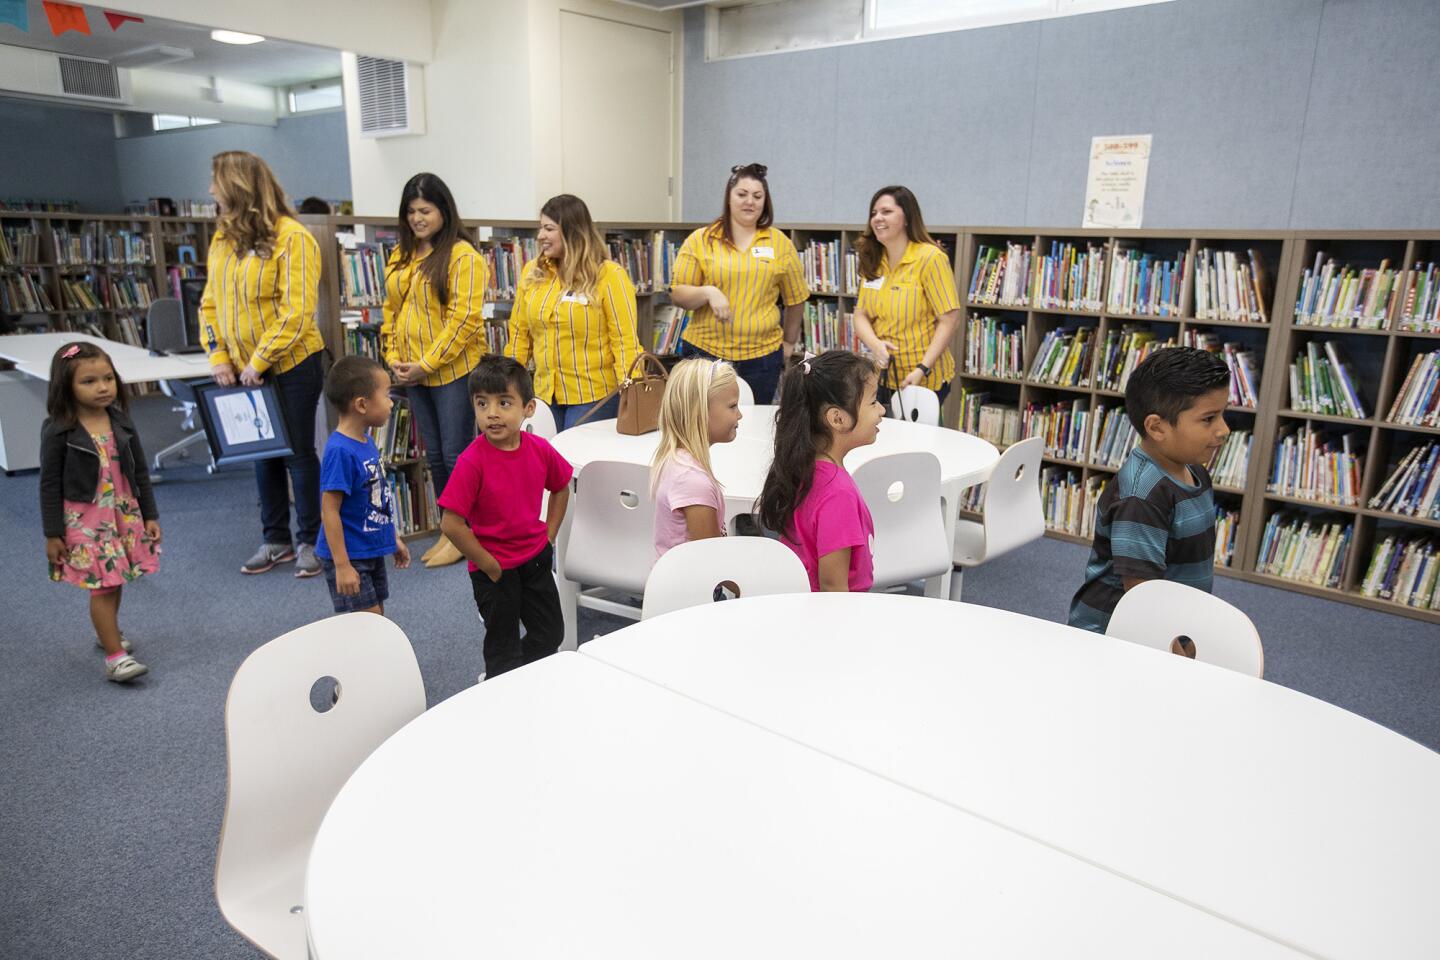 Representatives of IKEA watch as students check out the newly revamped library at Paularino Elementary School in Costa Mesa on Friday. IKEA donated furnishings for a complete remodel.